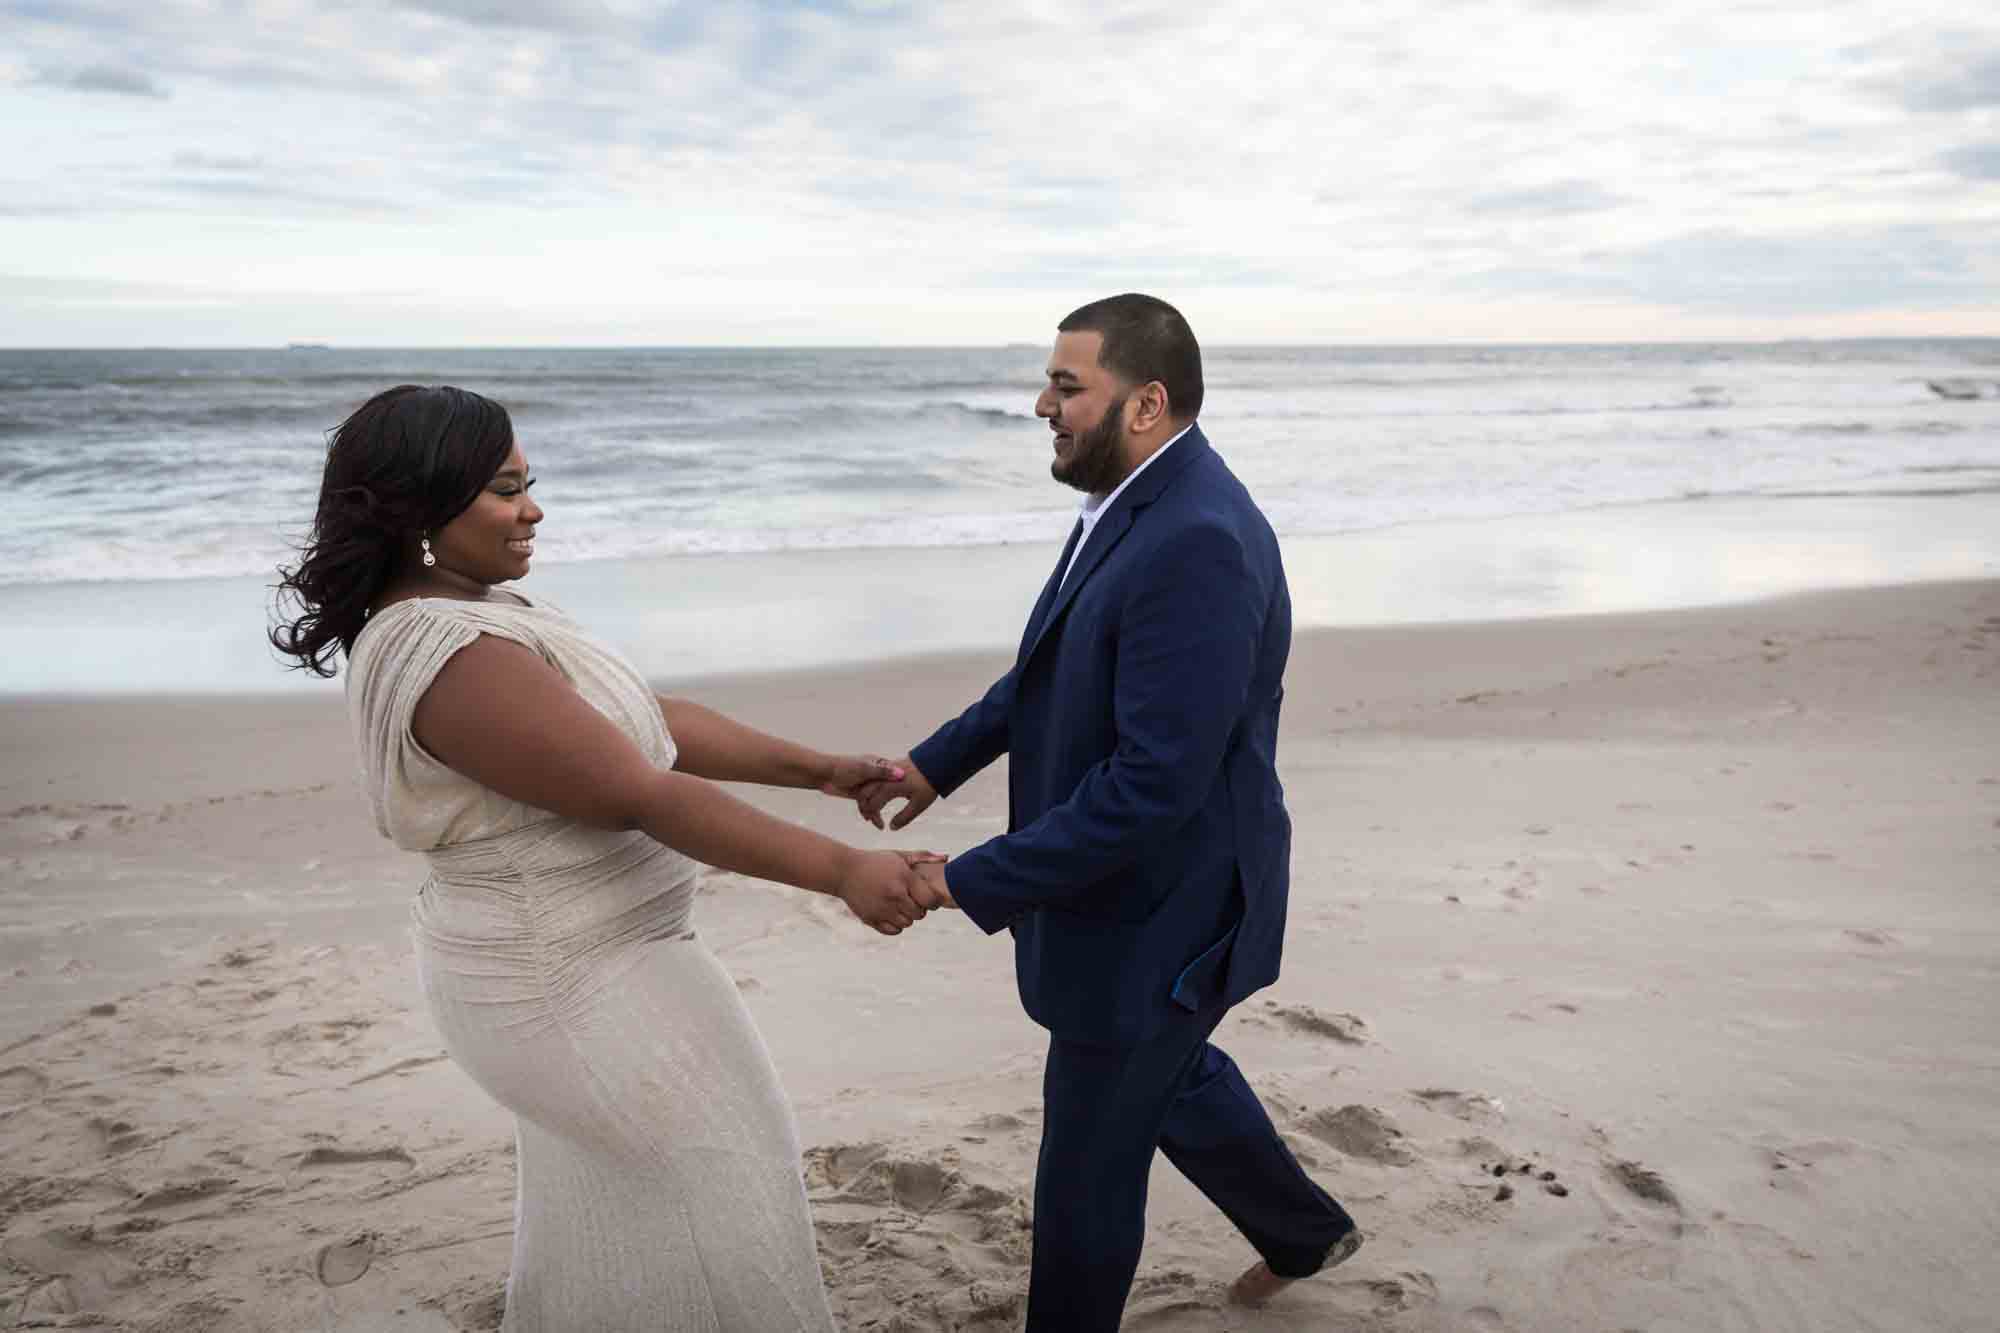 Couple dancing on the beach for an article on how to plan the perfect beach engagement photo shoot